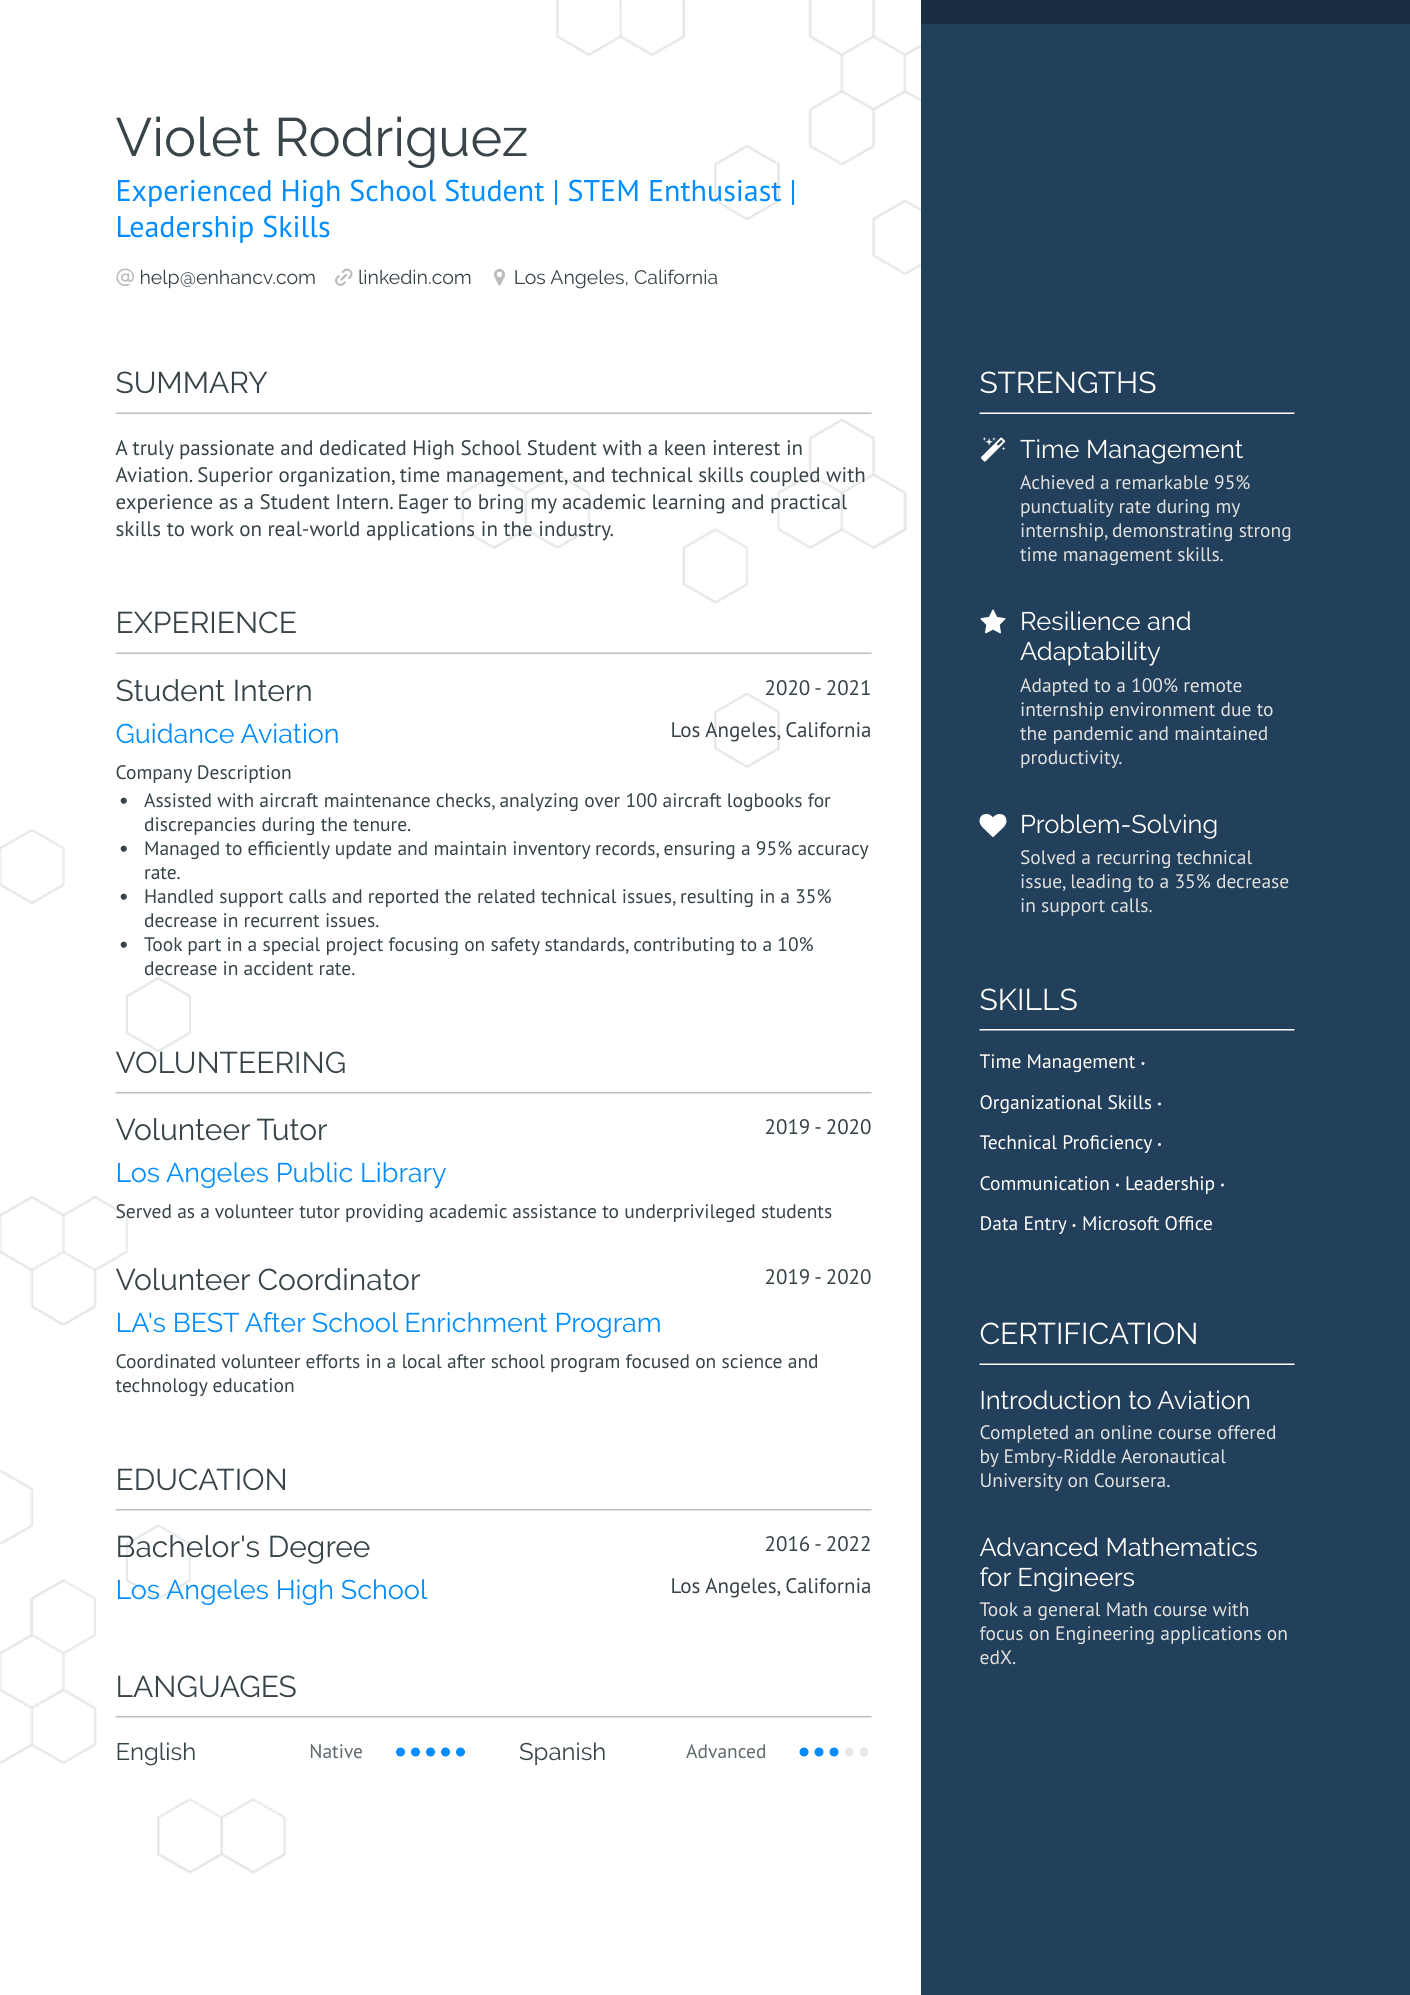 sample resume for 12th students